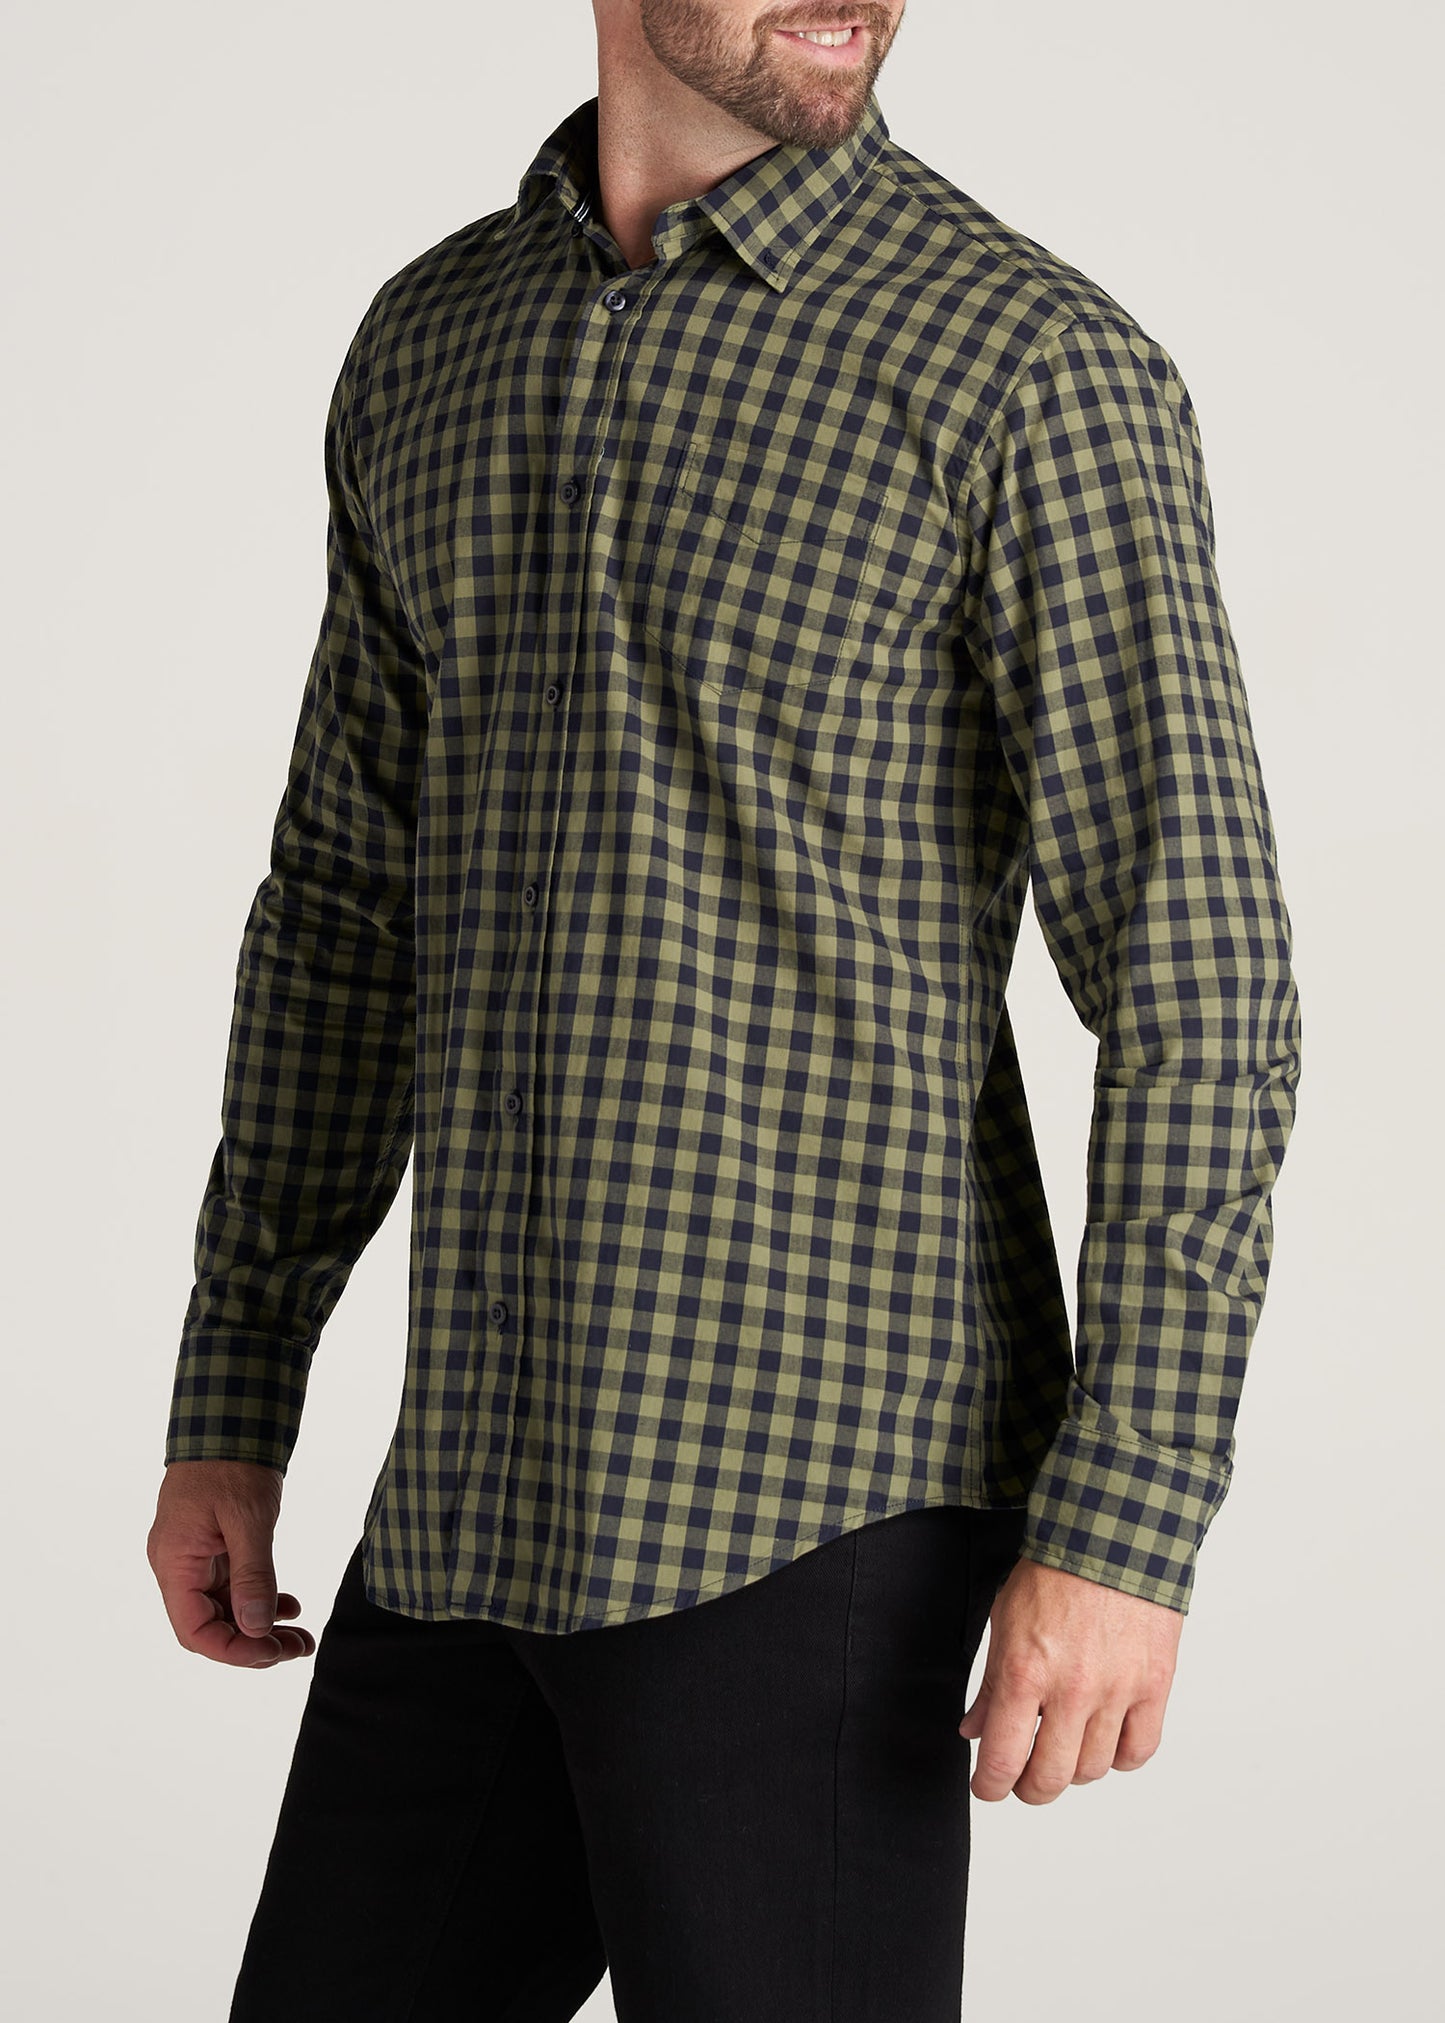     American-Tall-Men-SoftWash-Tall-ButtonUp-Shirt-MidnightBlue-Olive-side